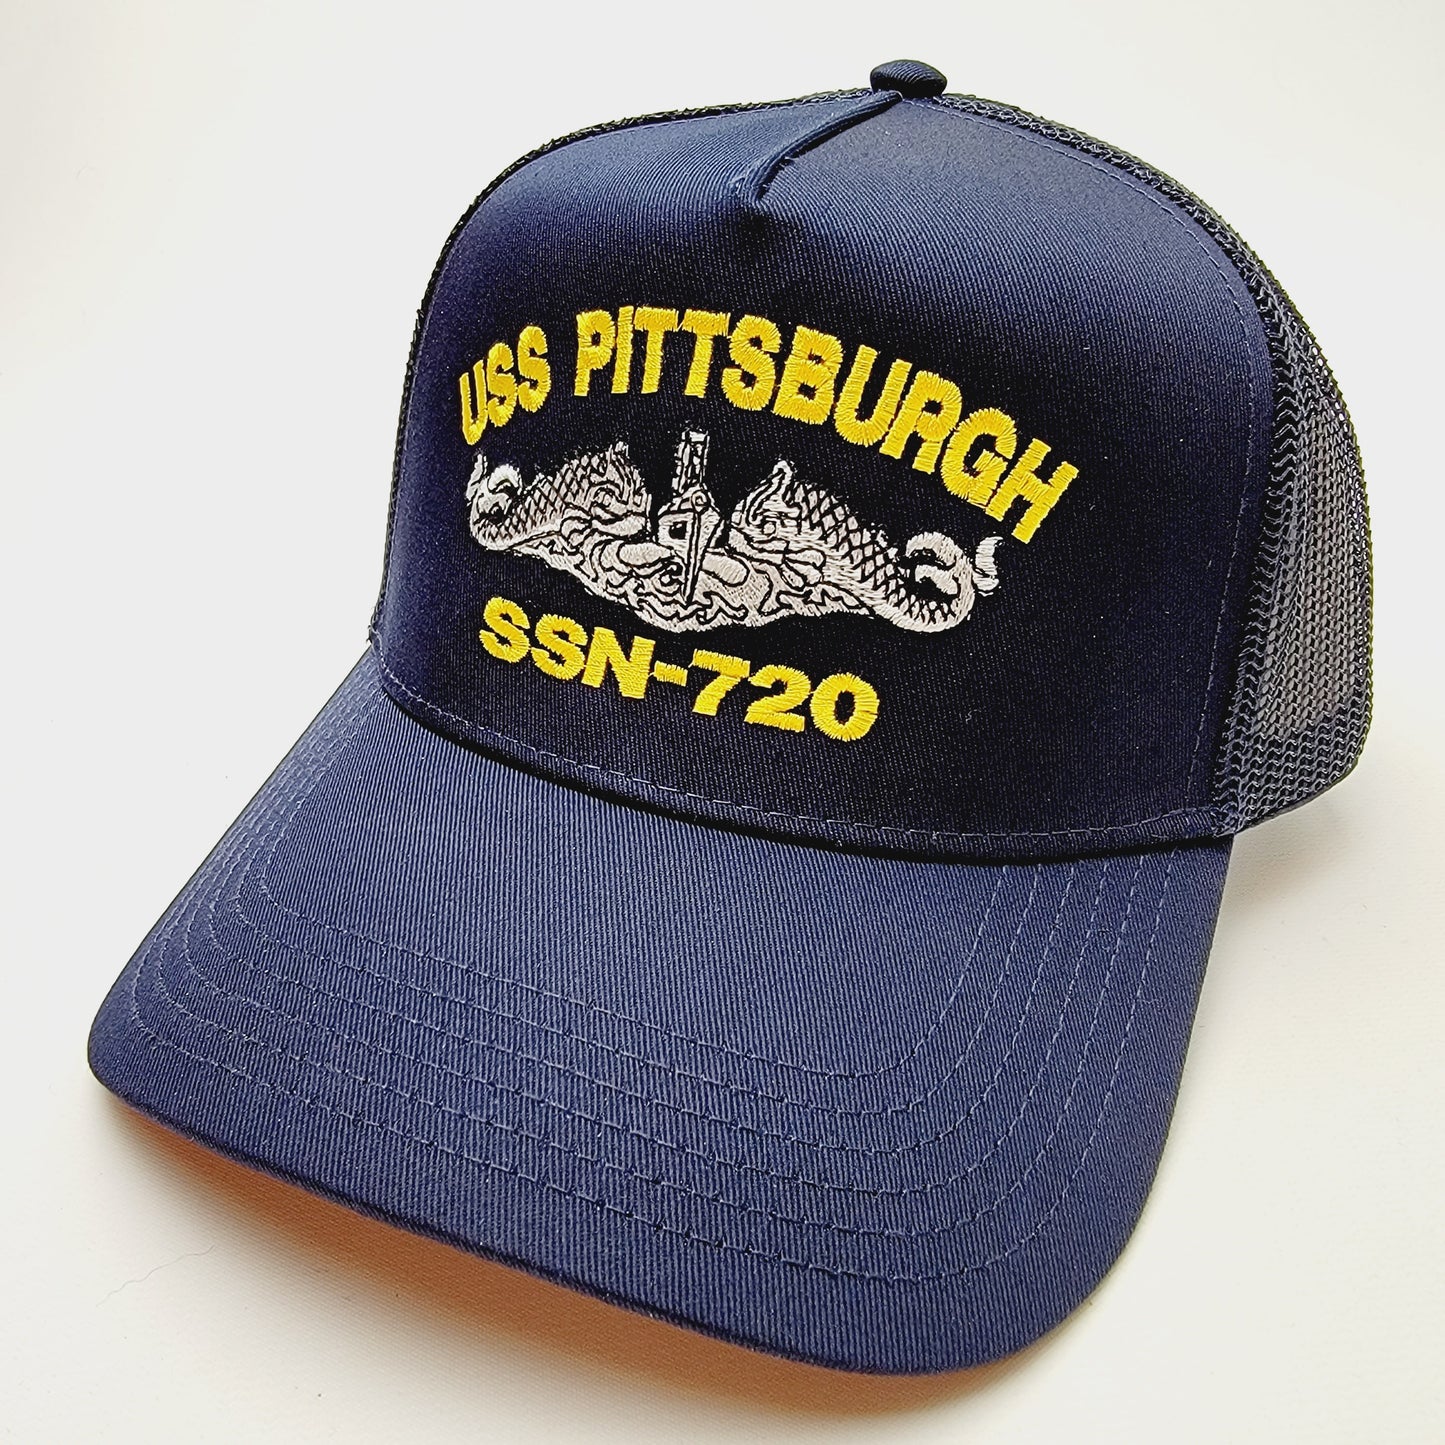 US NAVY USS PITTSBURGH SSN-720 Embroidered Hat Baseball Cap Adjustable Blue